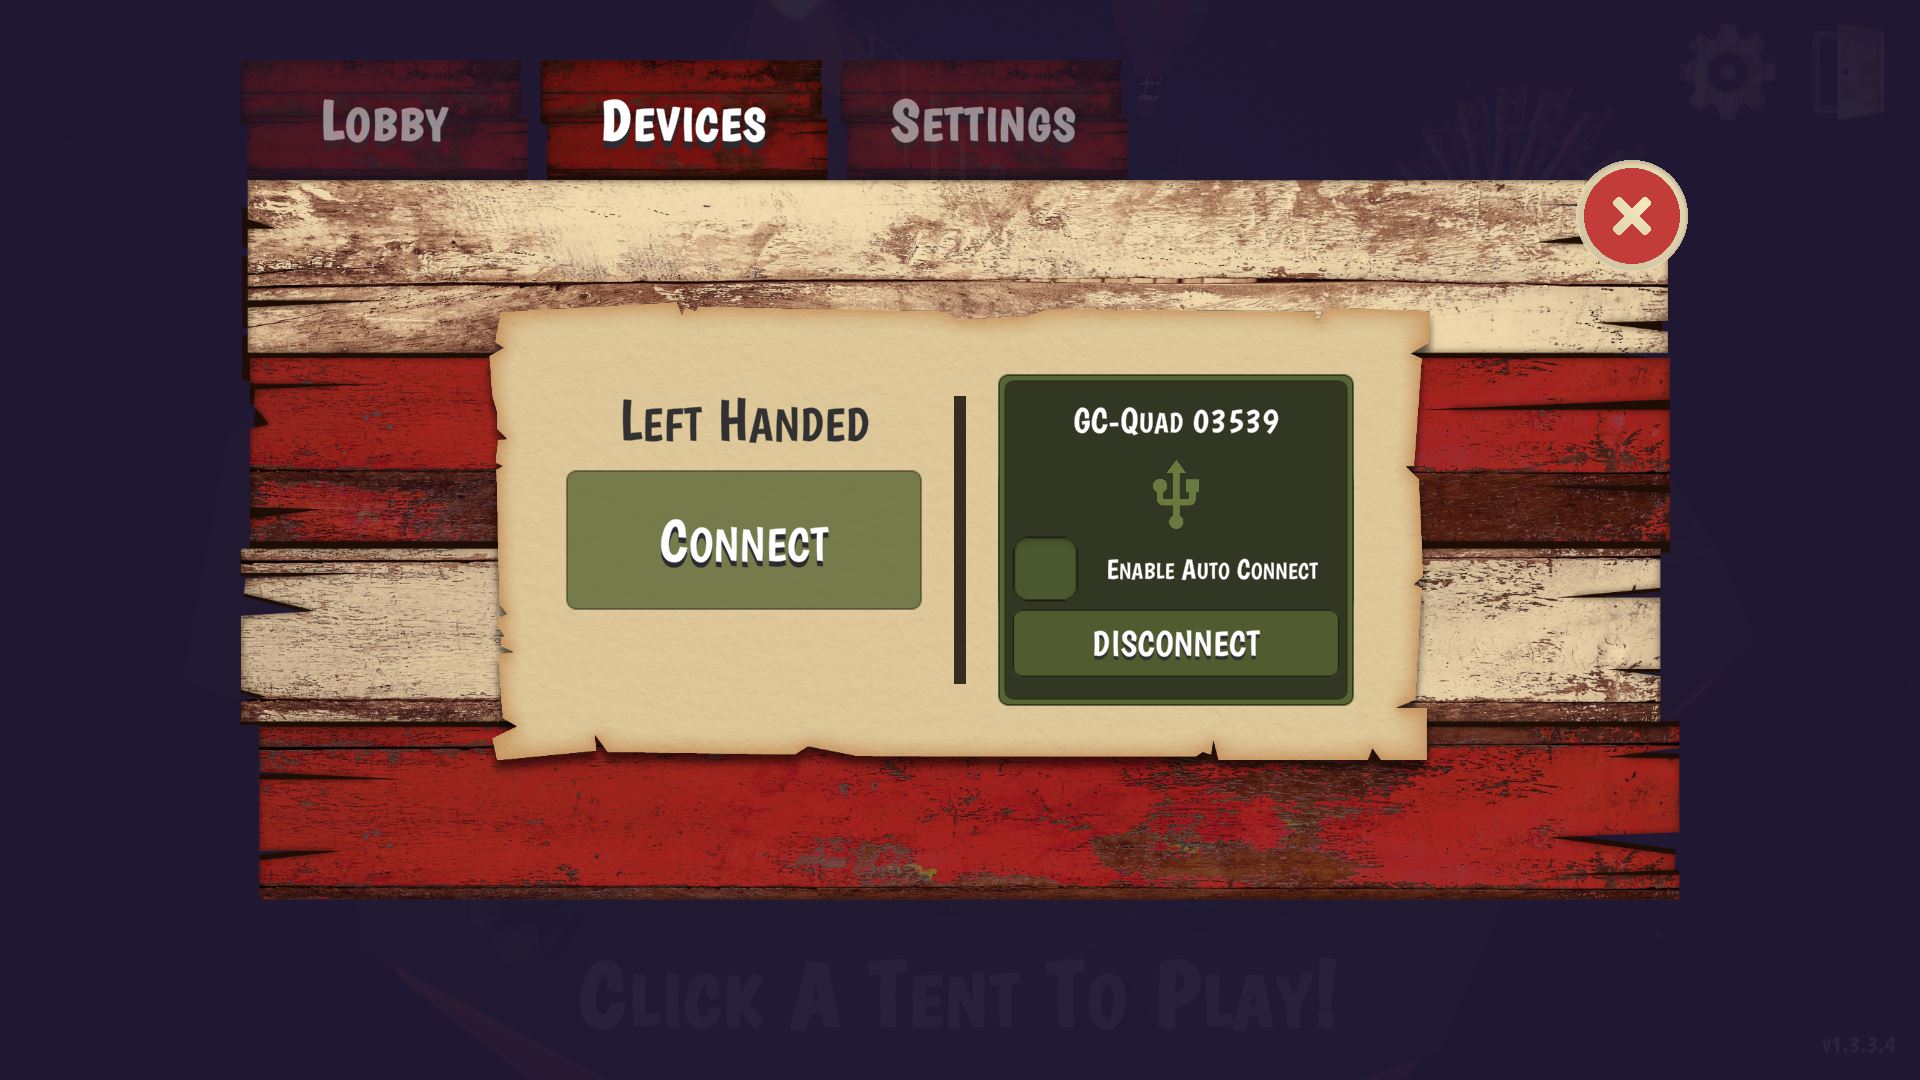 Fairgrounds Game Settings - Devices 